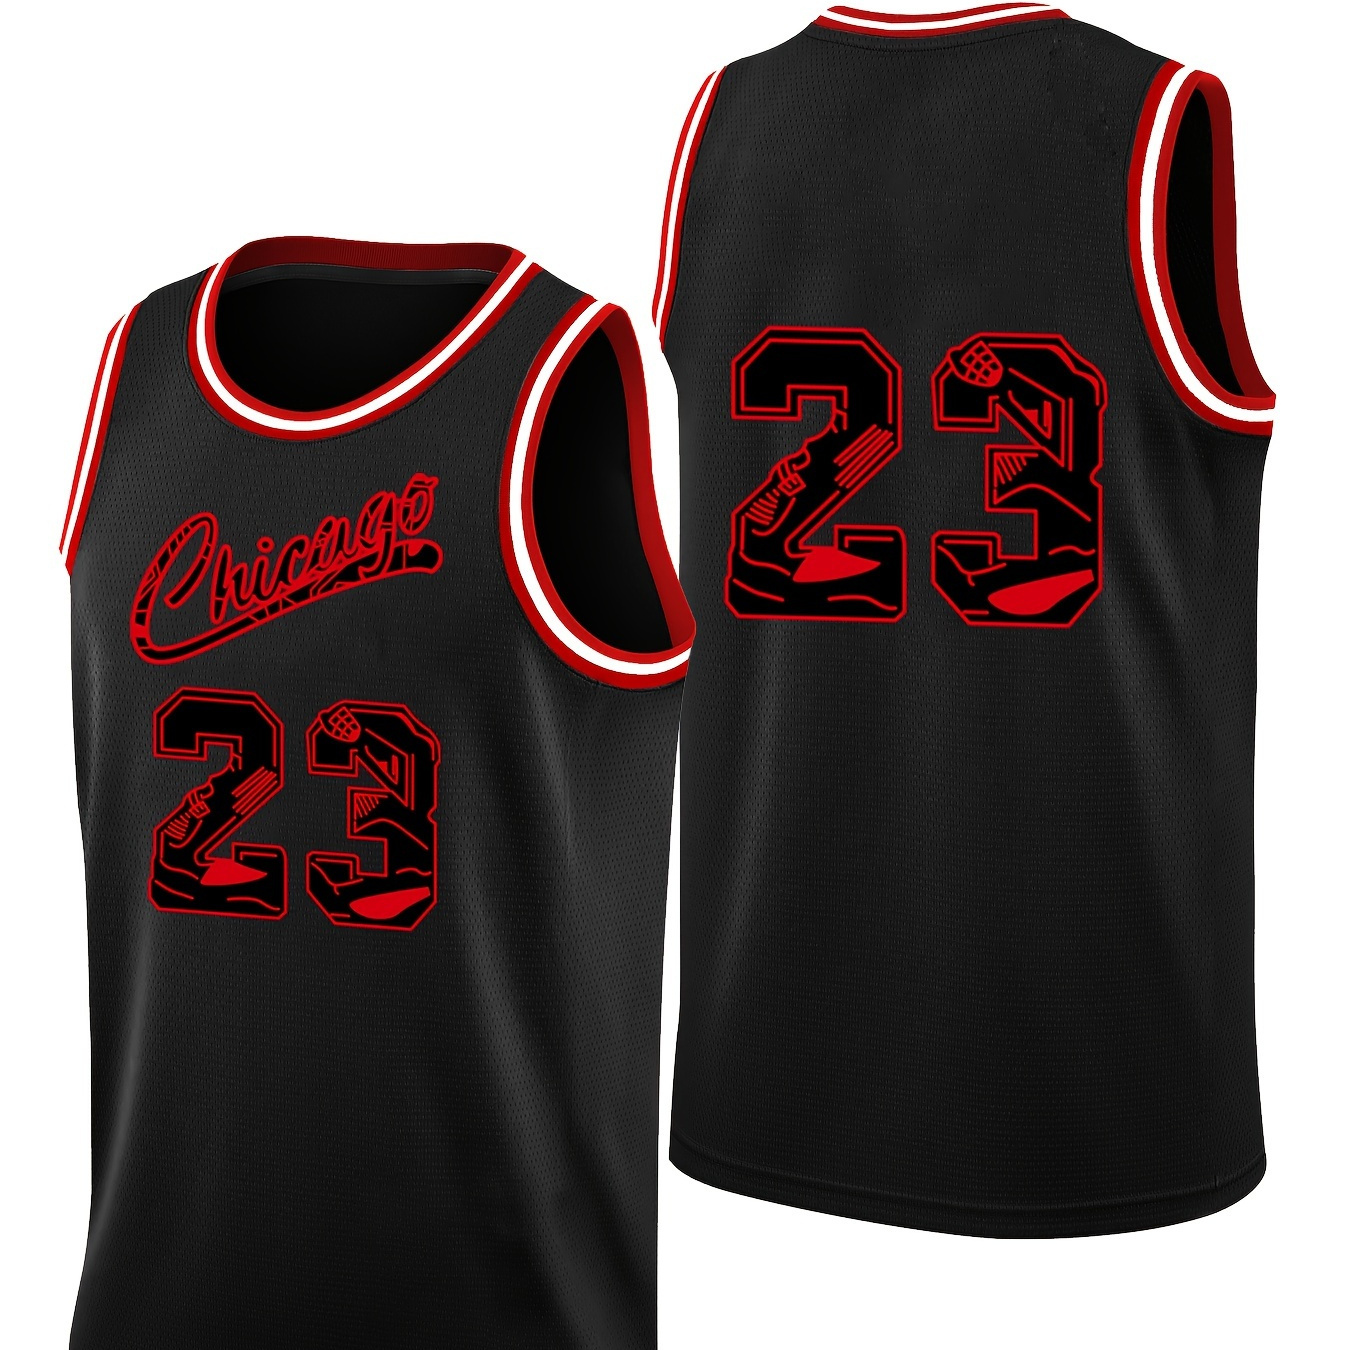 

Basketball Jersey Tank Top For Men, Chicago & #23 Graphic Print Top For Competition Party